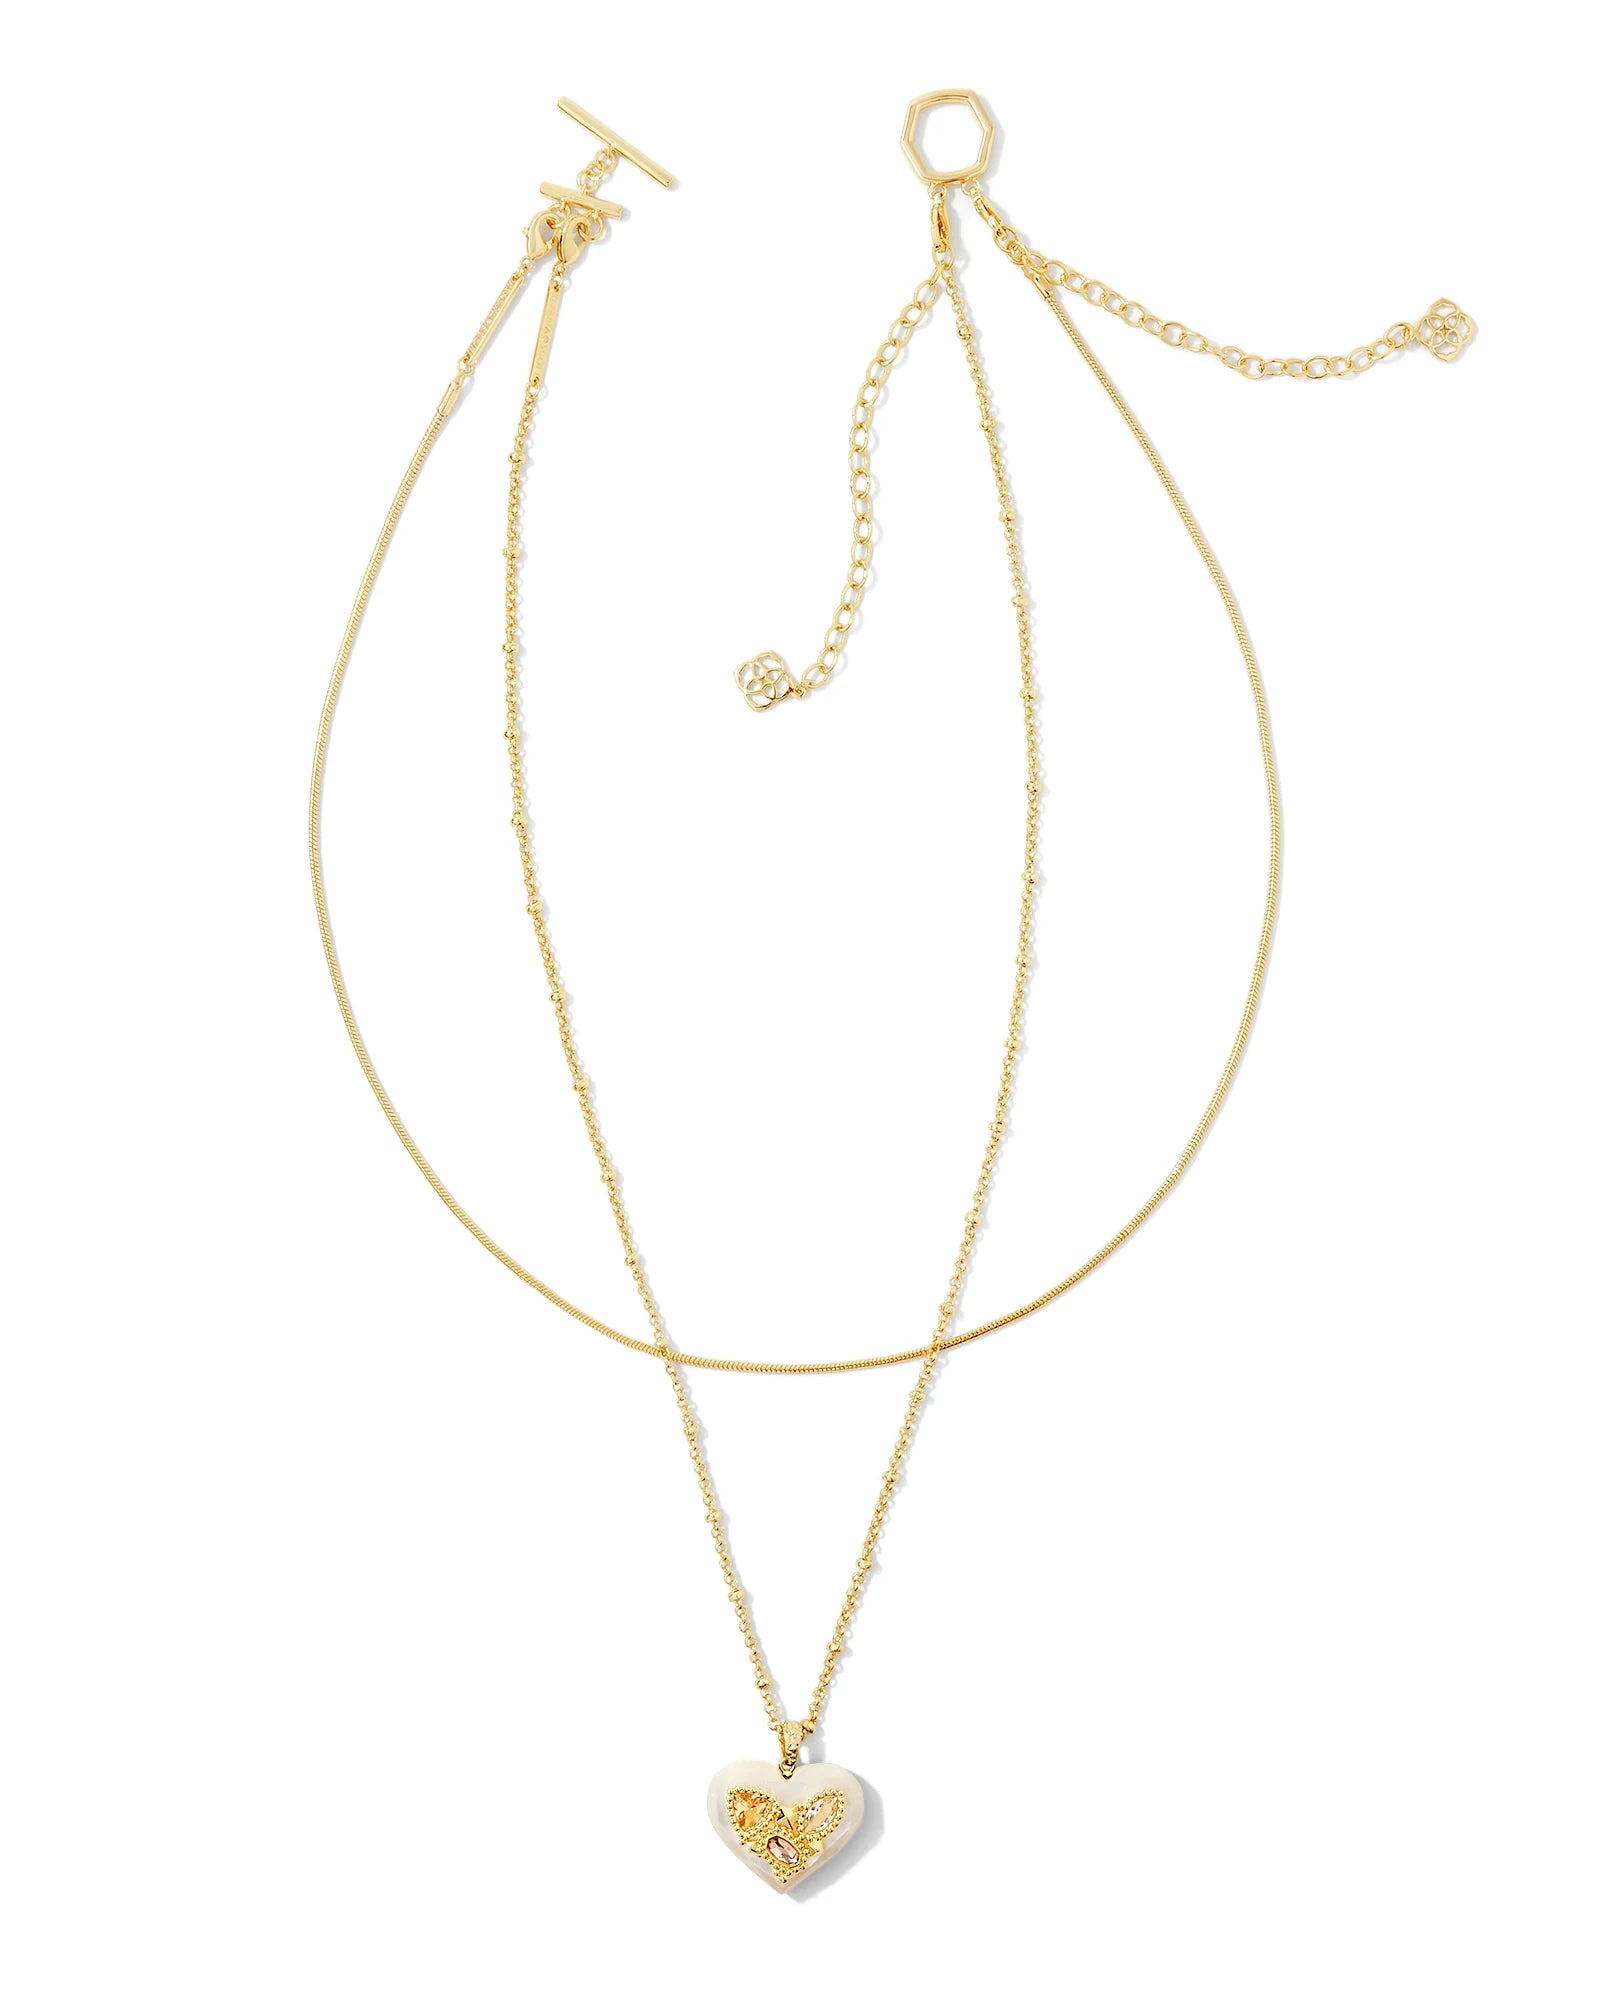 Kendra Scott Penny Heart Multi Strand Necklace Gold Ivory Mother of Pearl-Necklaces-Kendra Scott-N00348GLD-The Twisted Chandelier